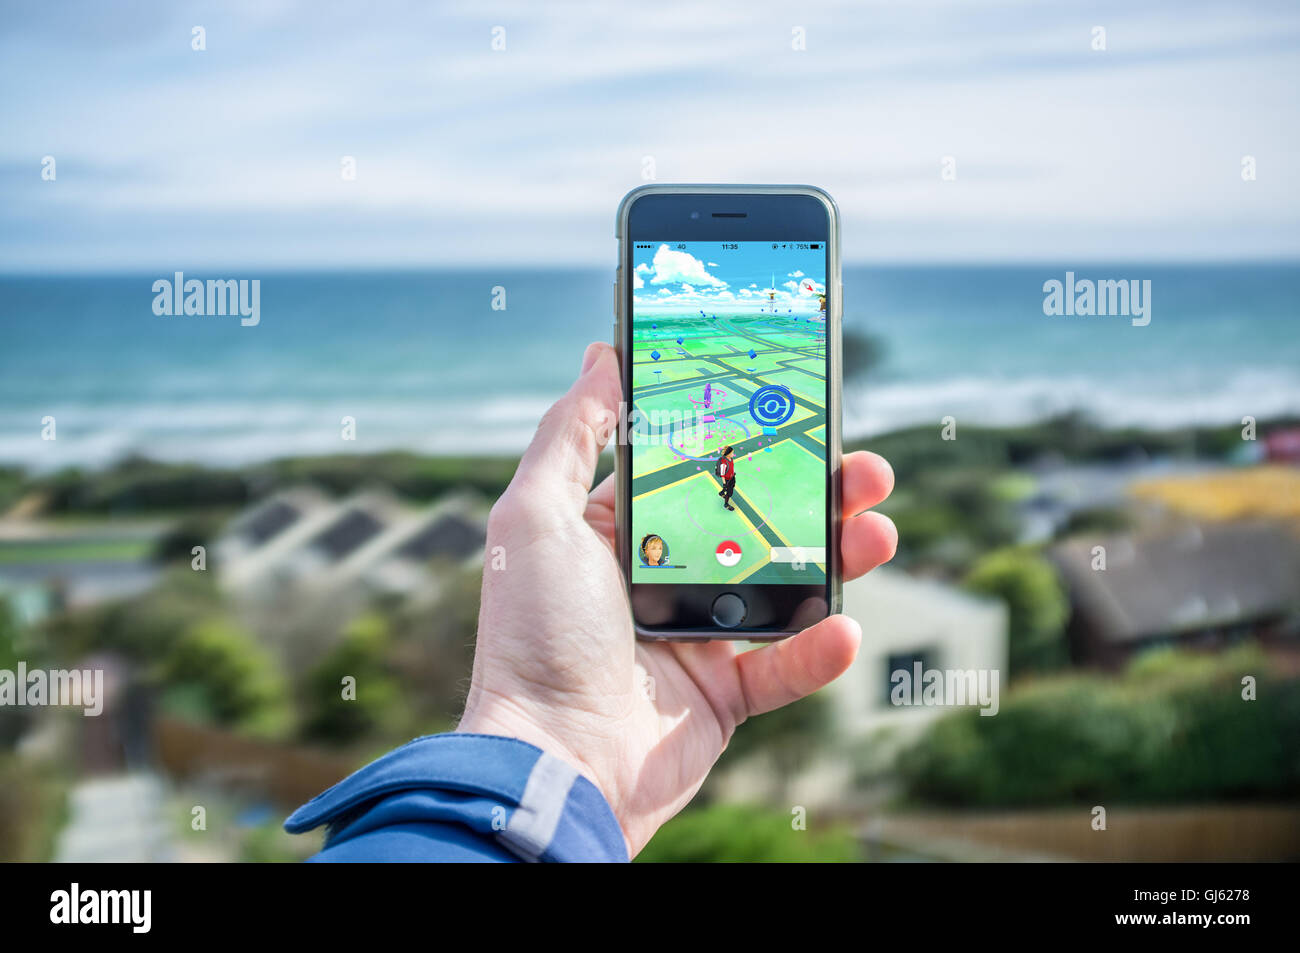 Melbourne, Australia - August 12, 2016: Male hand holding iPhone 6 with Pokemon Go game in residential area facing ocean Stock Photo